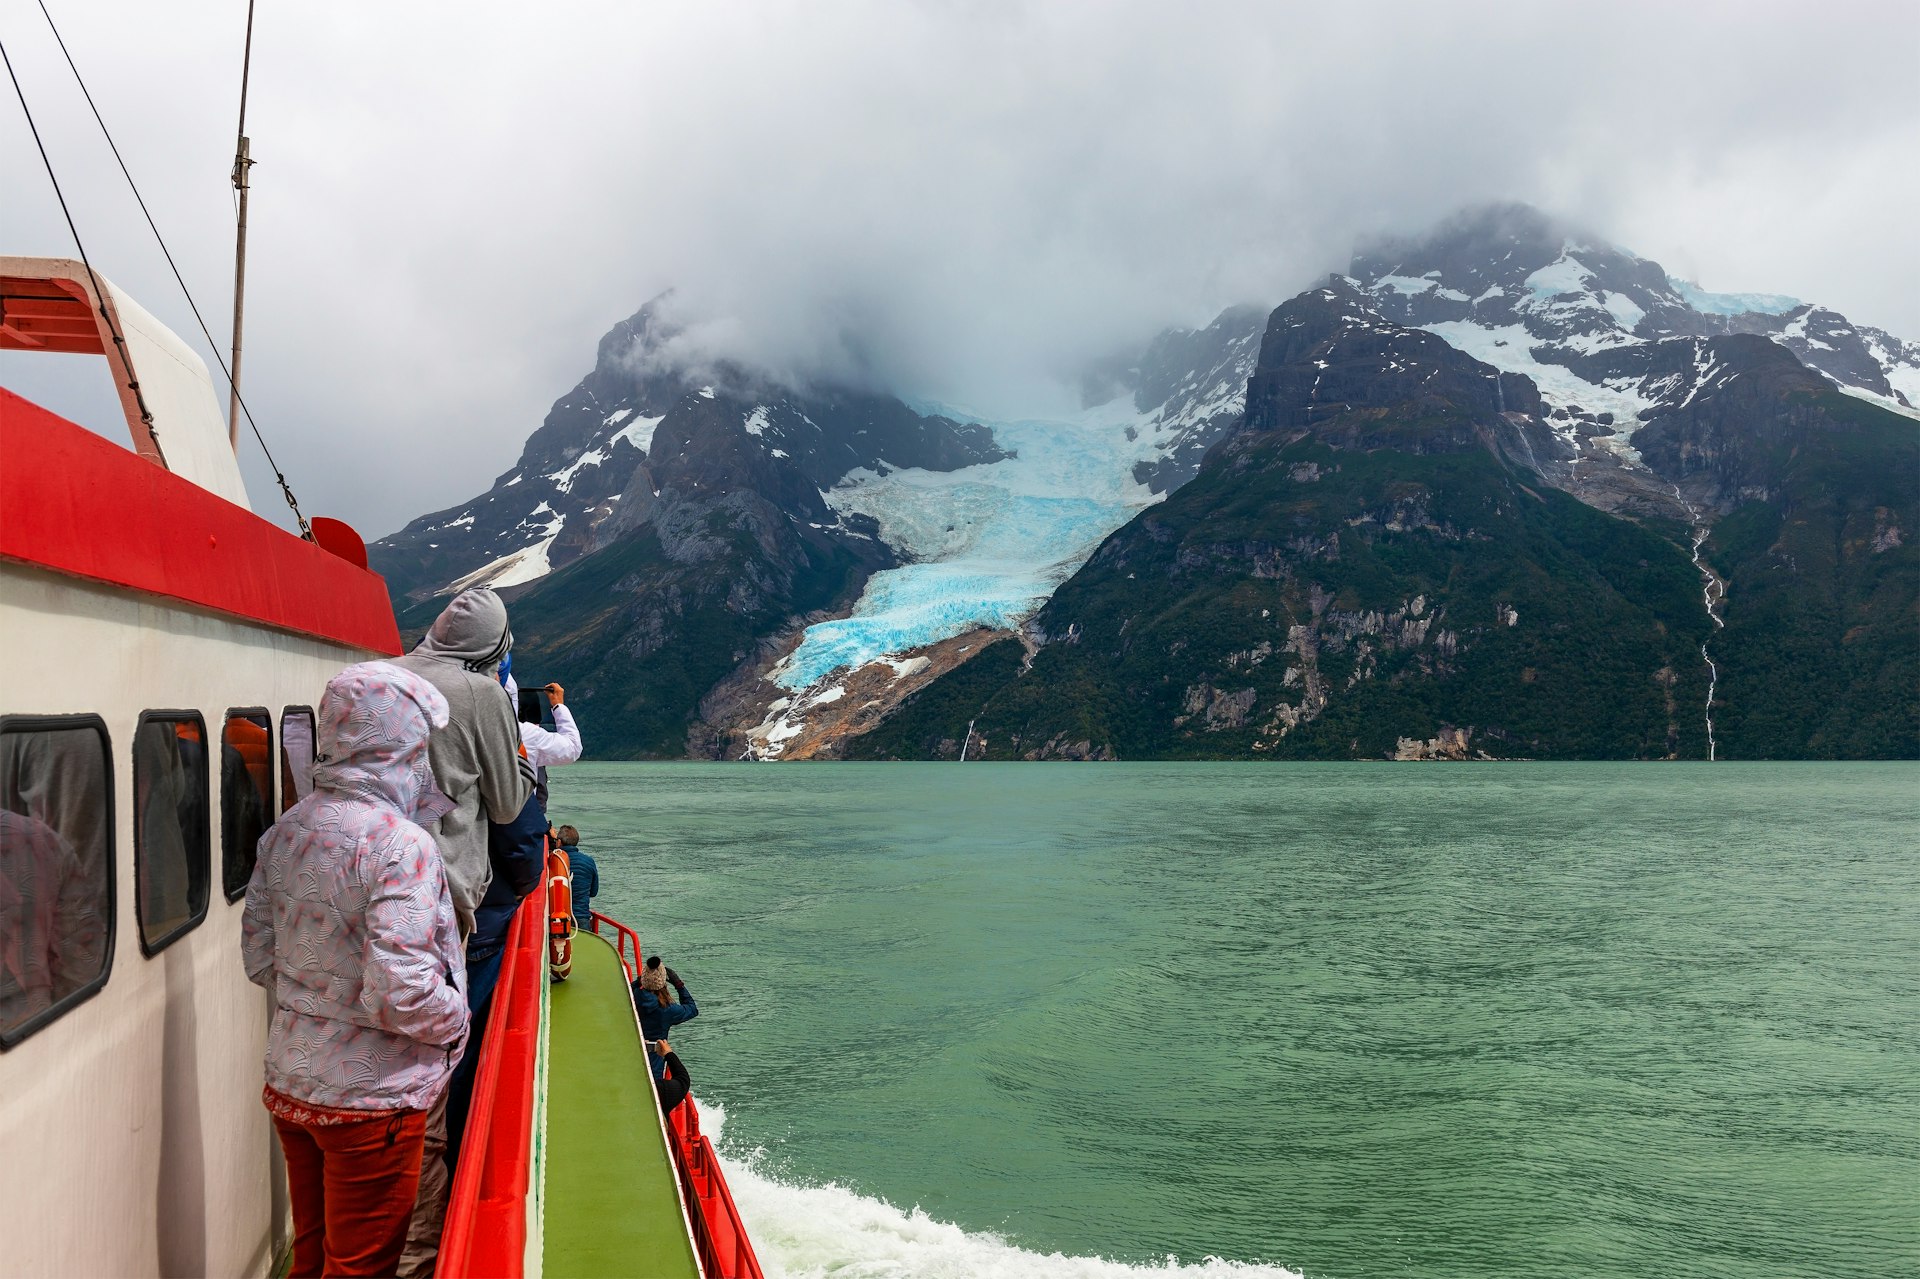 Tourists view a glacier from the deck of a red and white ship